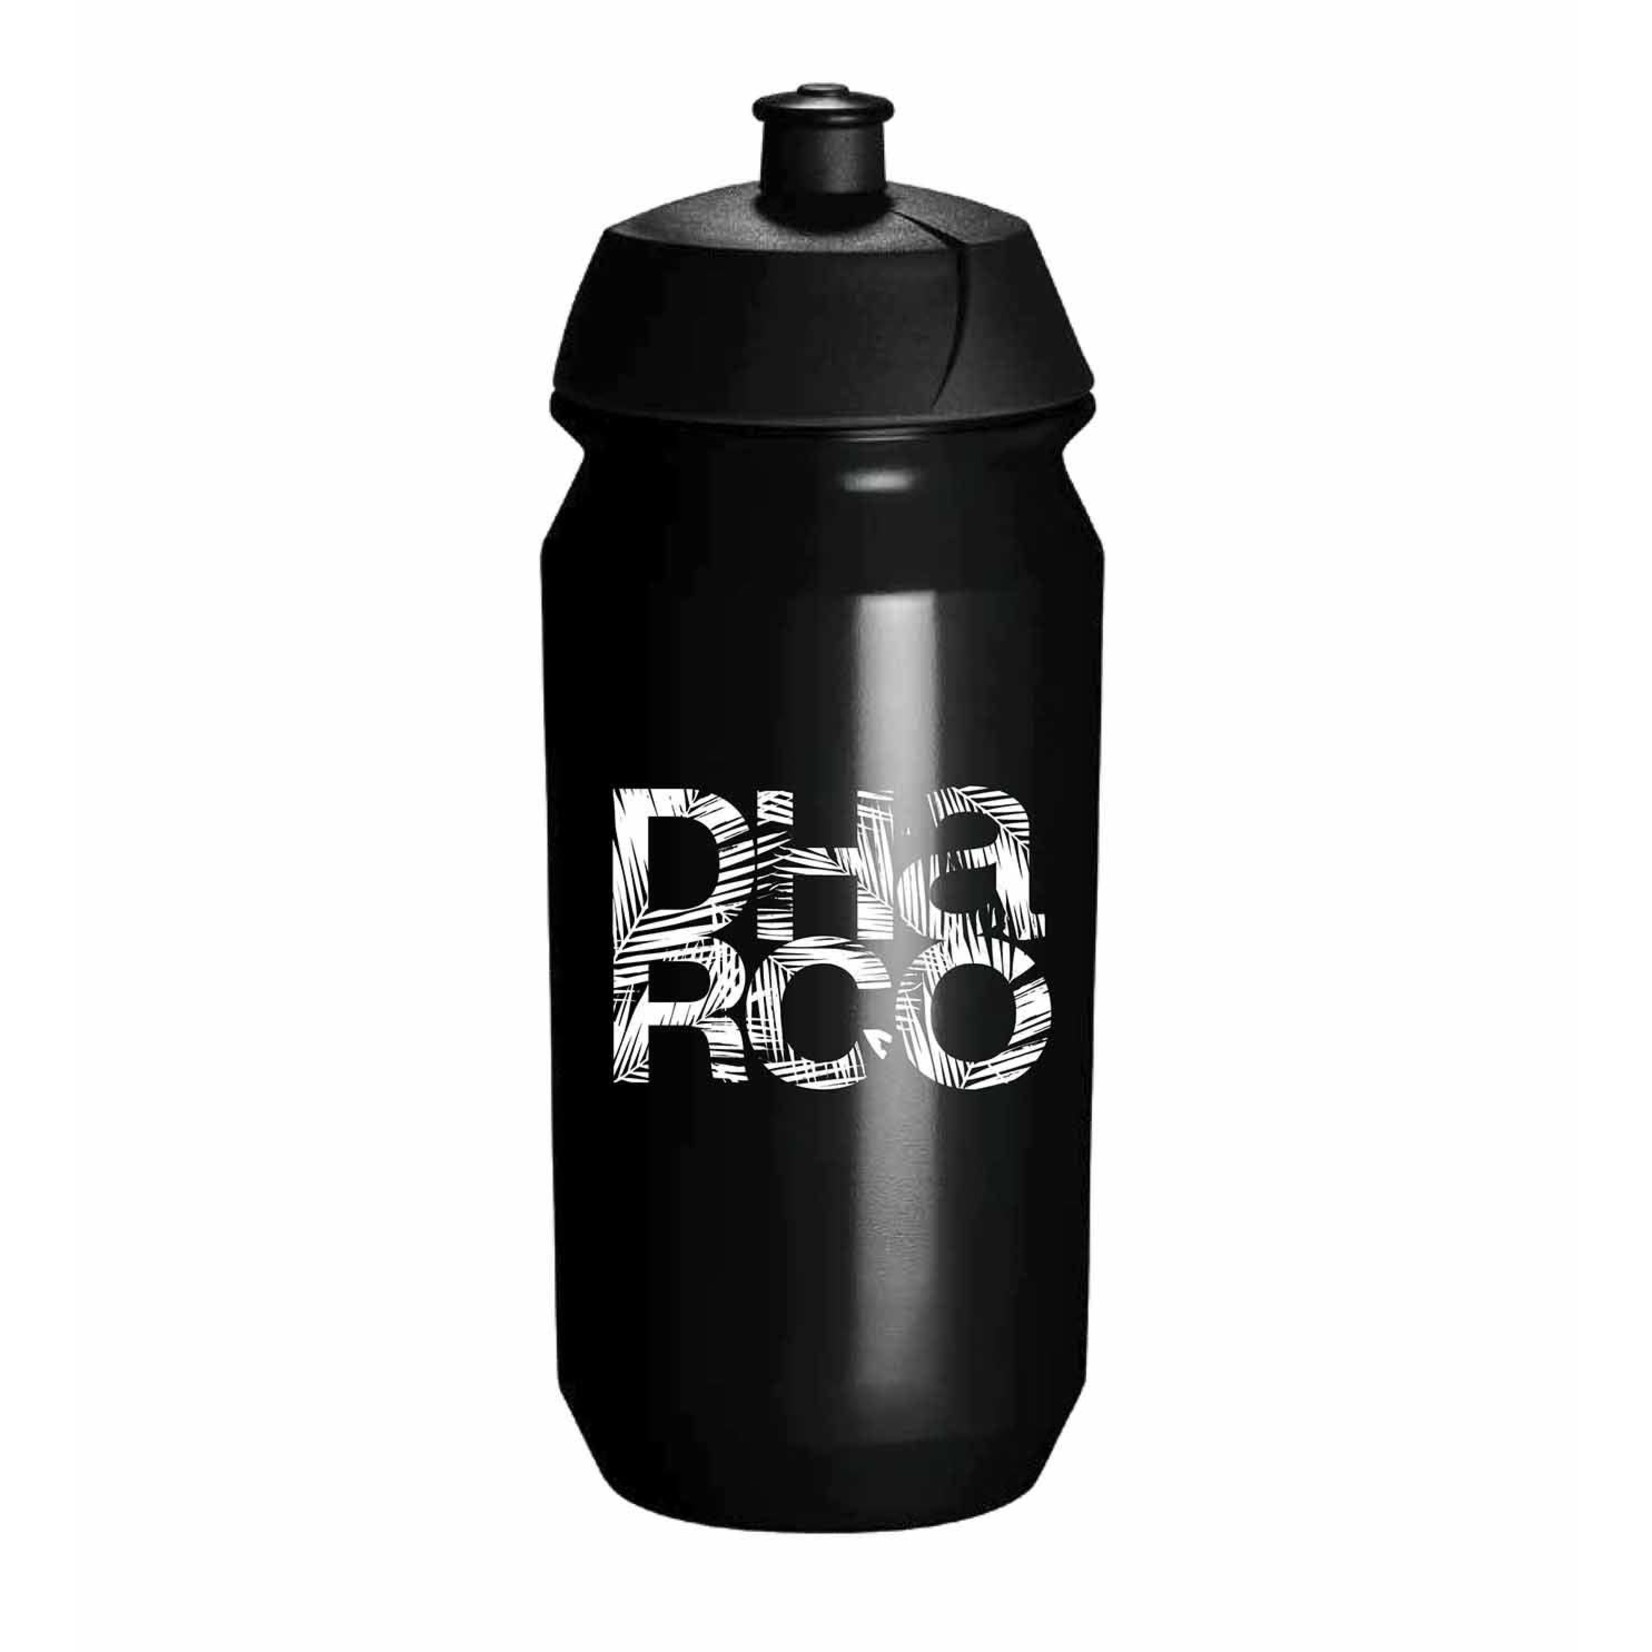 DHARCO DHARCO WATER BOTTLE 500ml